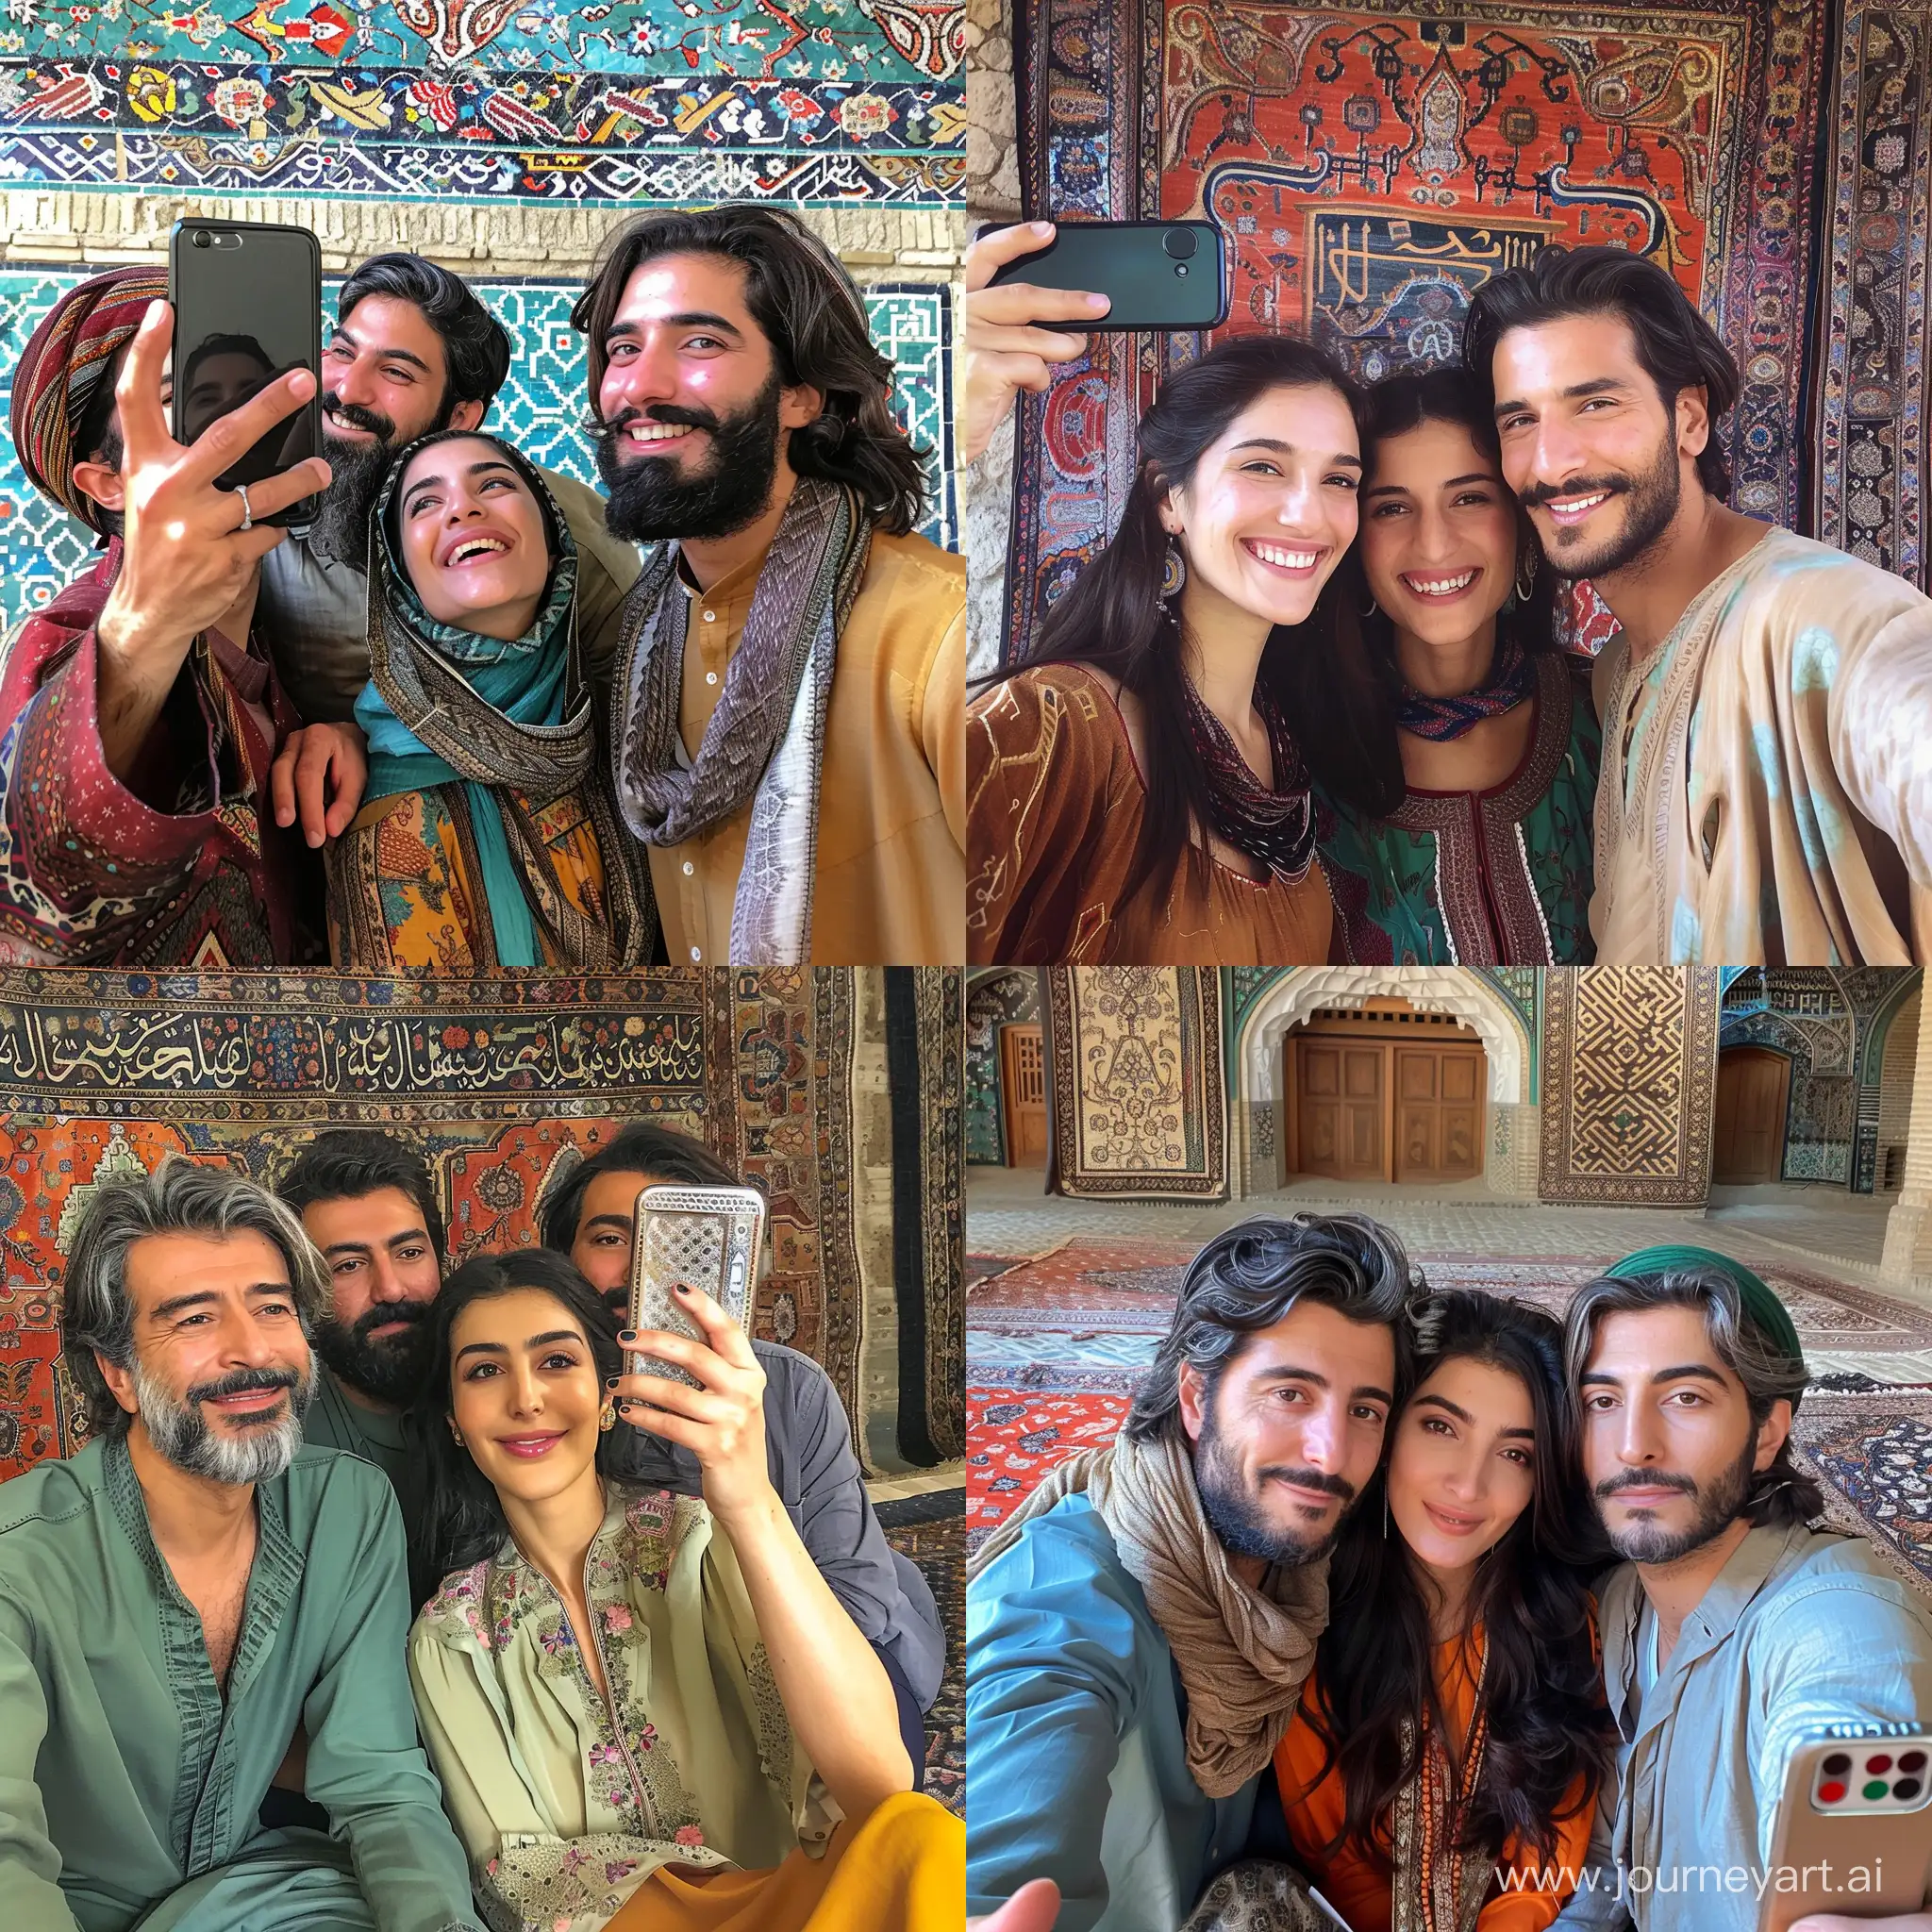 Hafez, Saadi and Forugh Farrokhzad taking a selfie together with traditional Iranian background